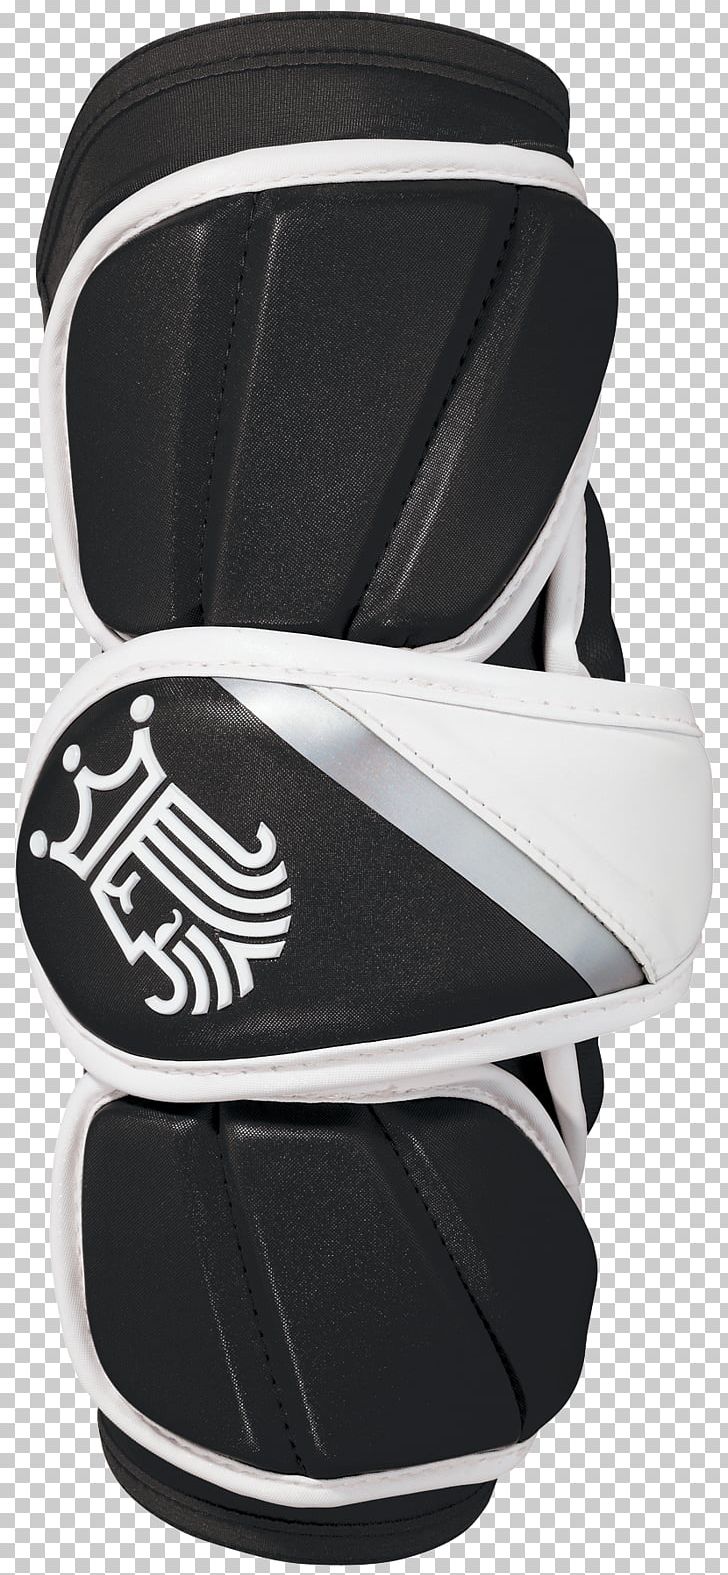 Protective Gear In Sports Lacrosse Glove Elbow Pad PNG, Clipart, Arm, Black, Clothing Accessories, Elbow, Elbow Pad Free PNG Download